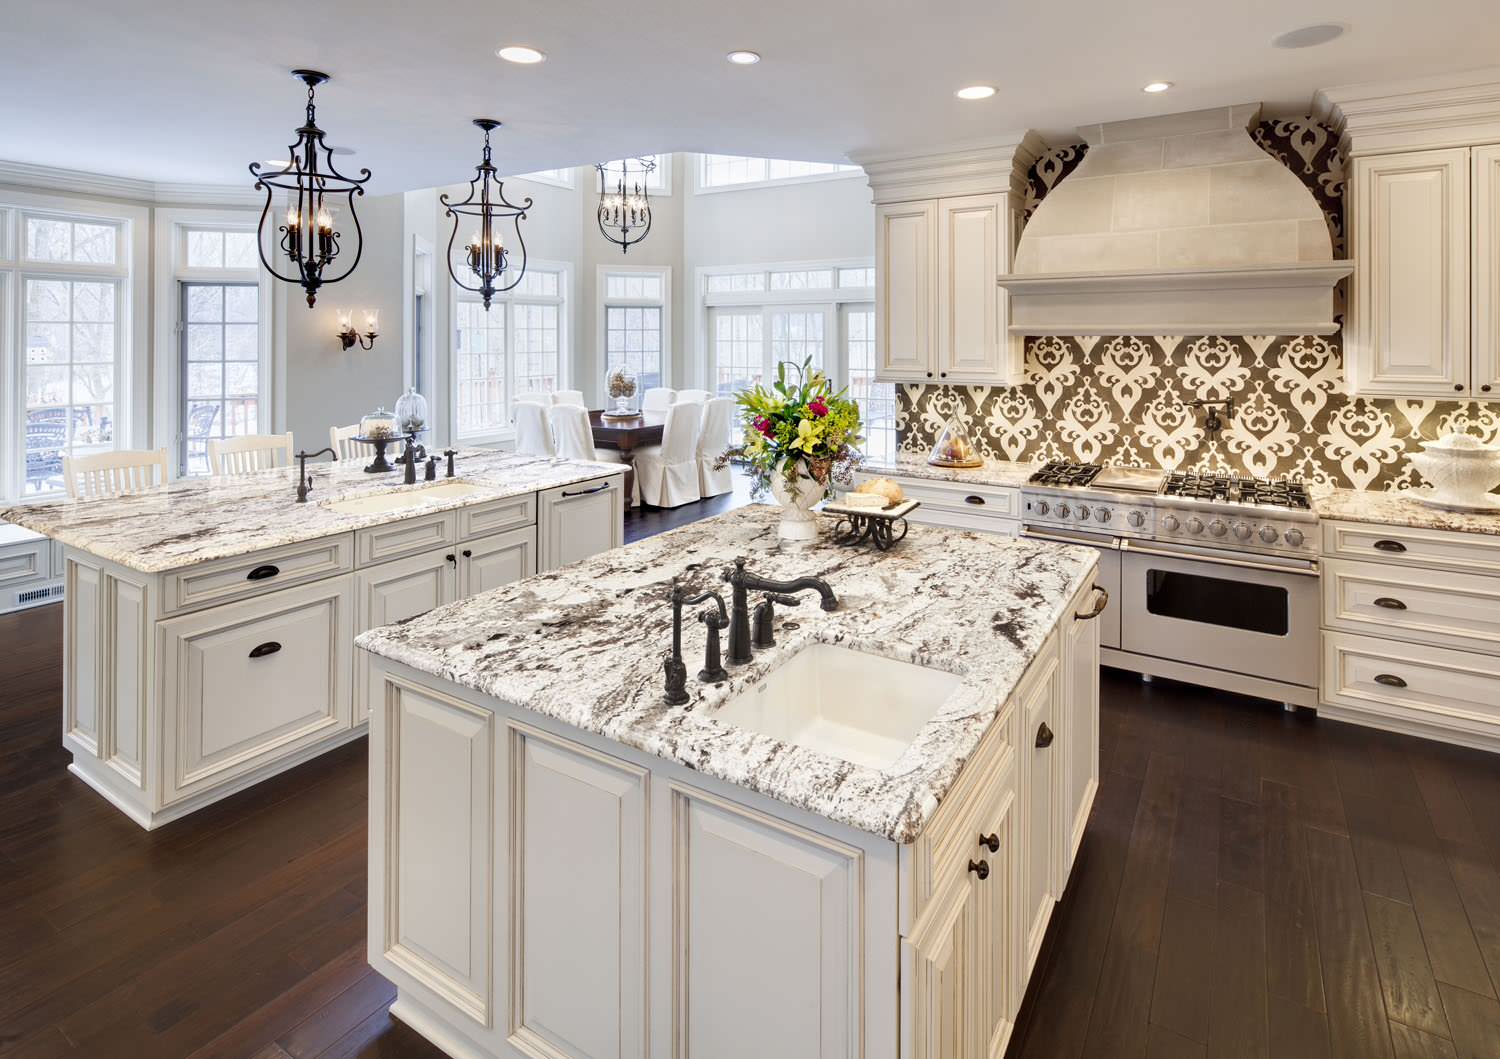 The kitchen features granite countertops, electric appliances, and